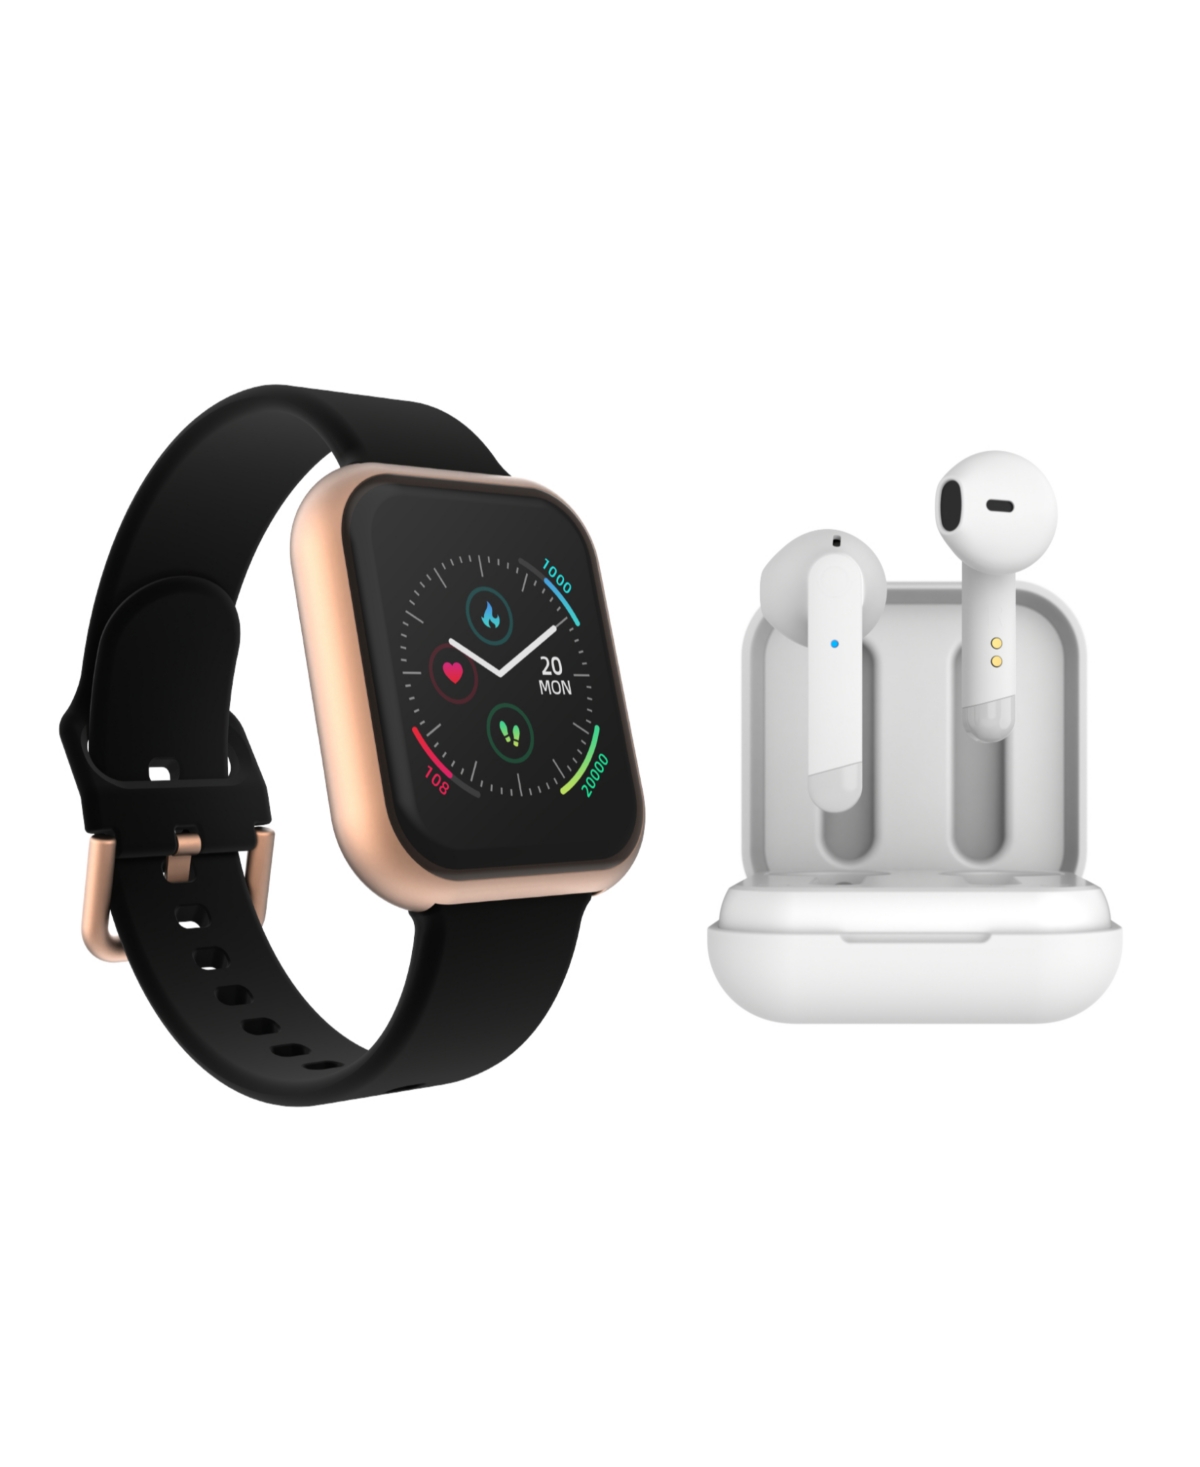 Air 3 Unisex Black Silicone Strap Smartwatch 40mm with White Amp Plus Wireless Earbuds Bundle - Black